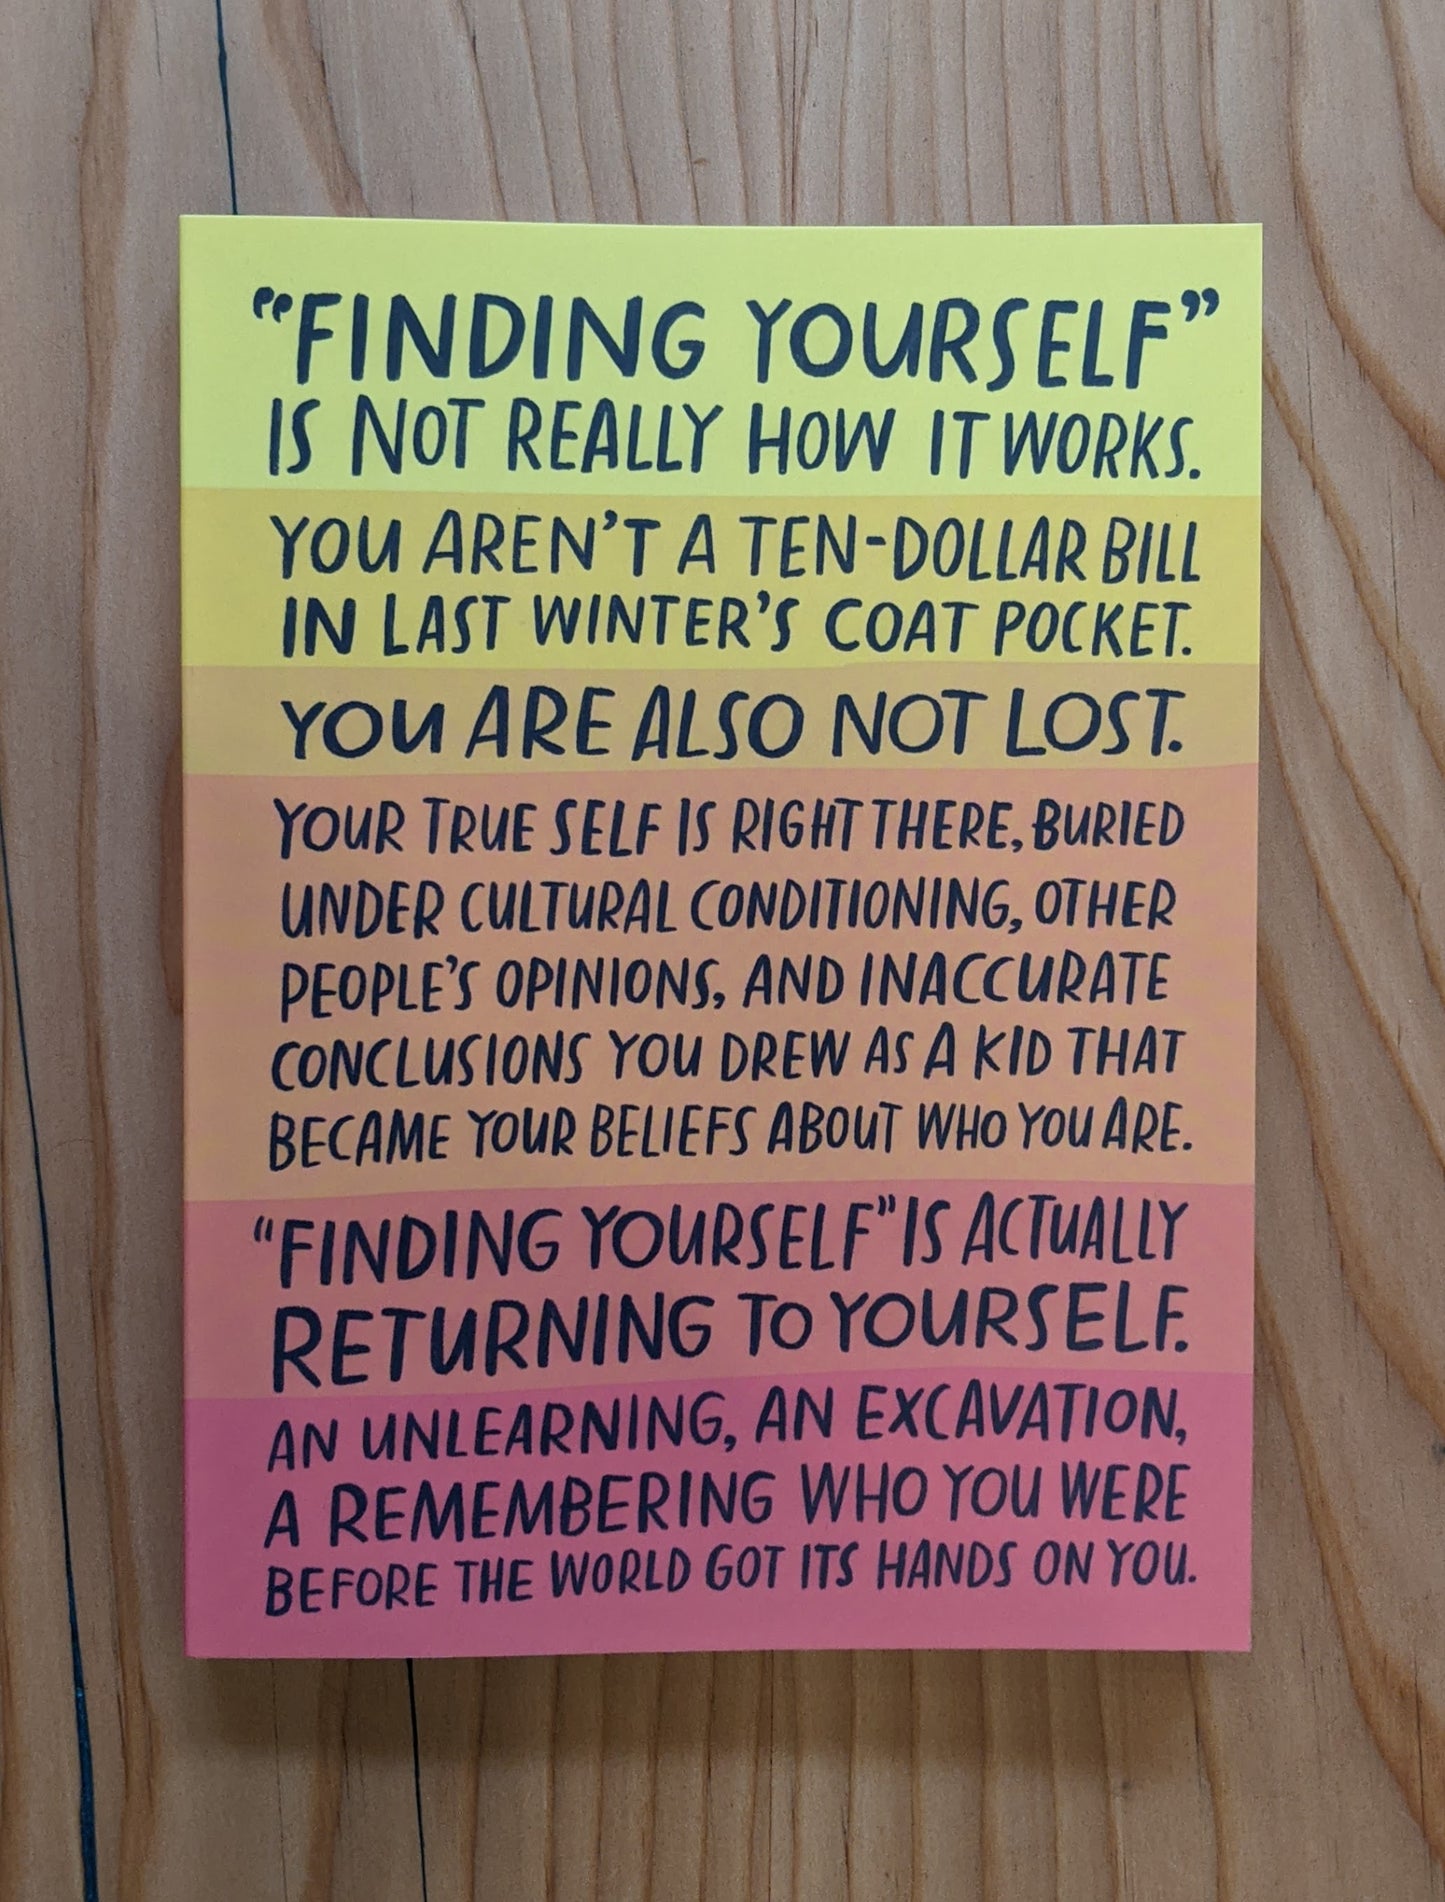 One of Emily McDowell journal designs: "Finding yourself.." front quote